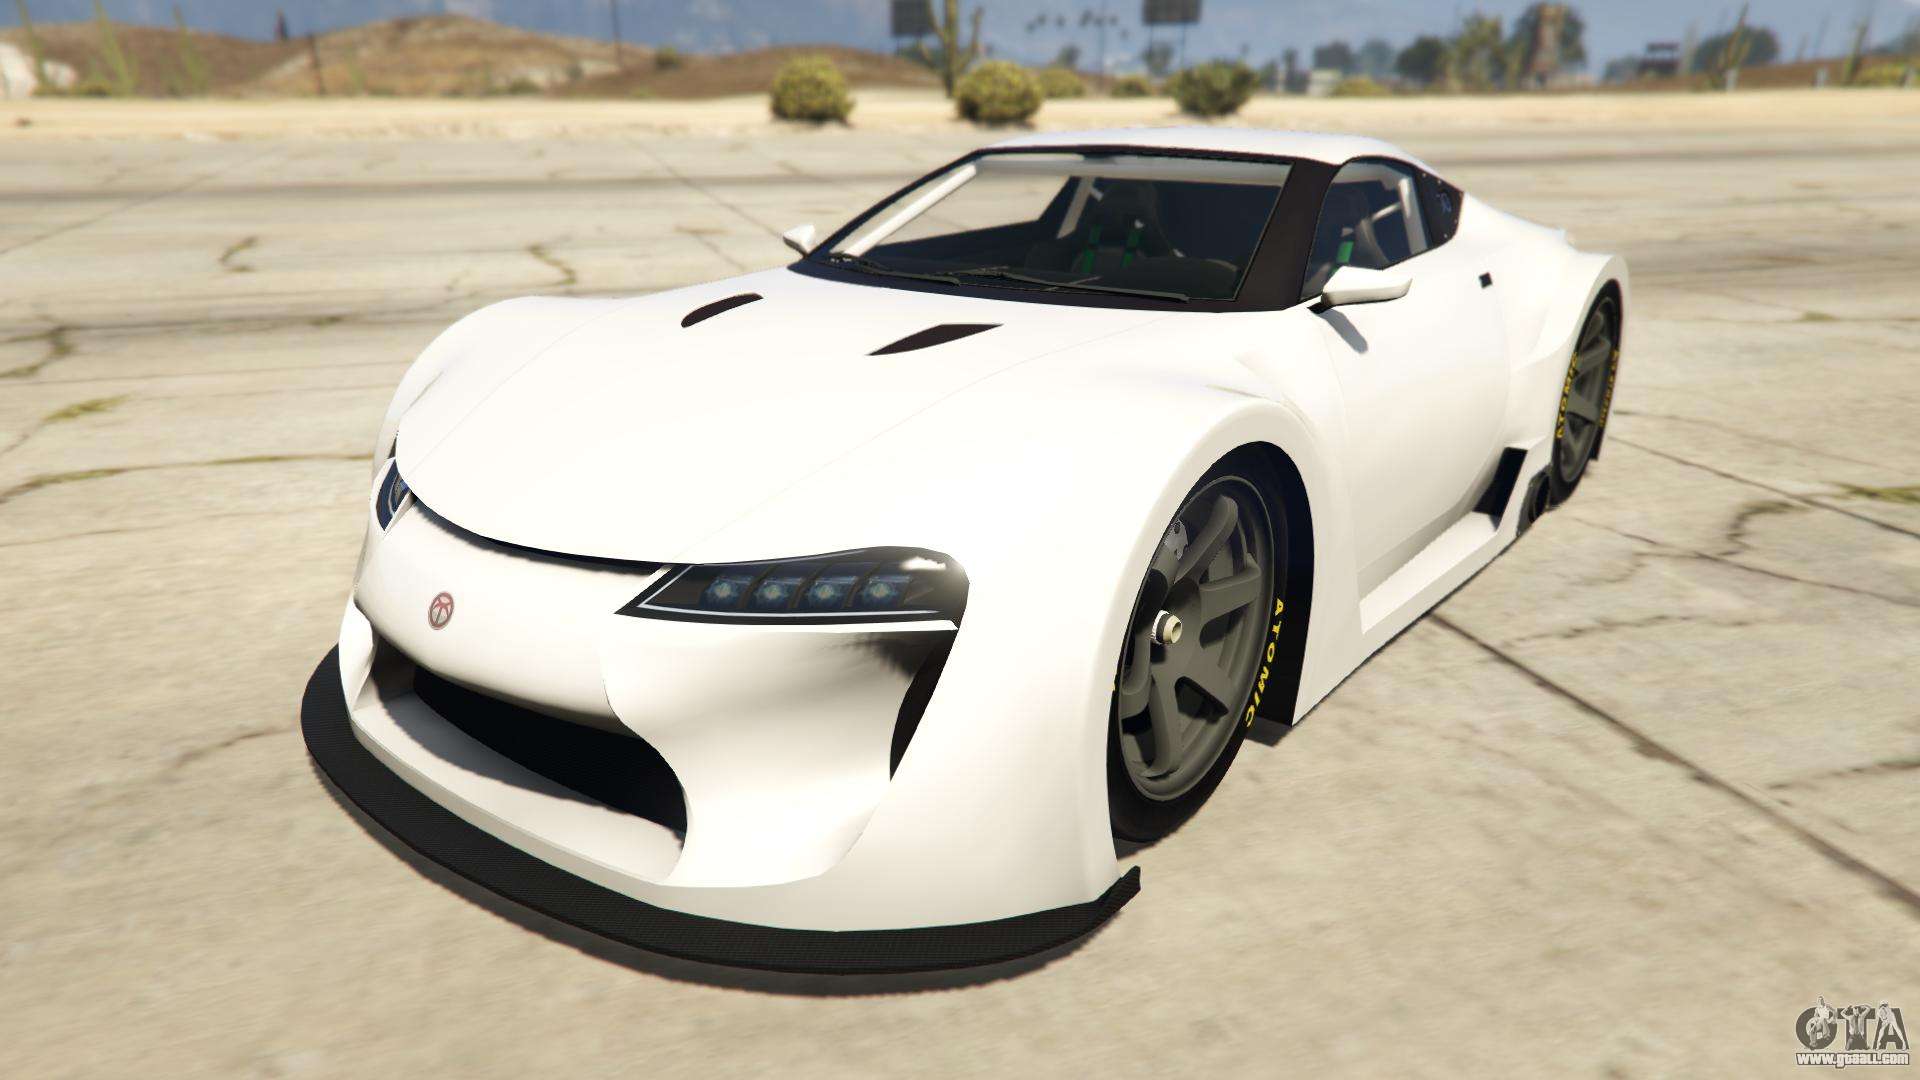 Emperor ETR1 from GTA 5 - screenshots, features and the description of